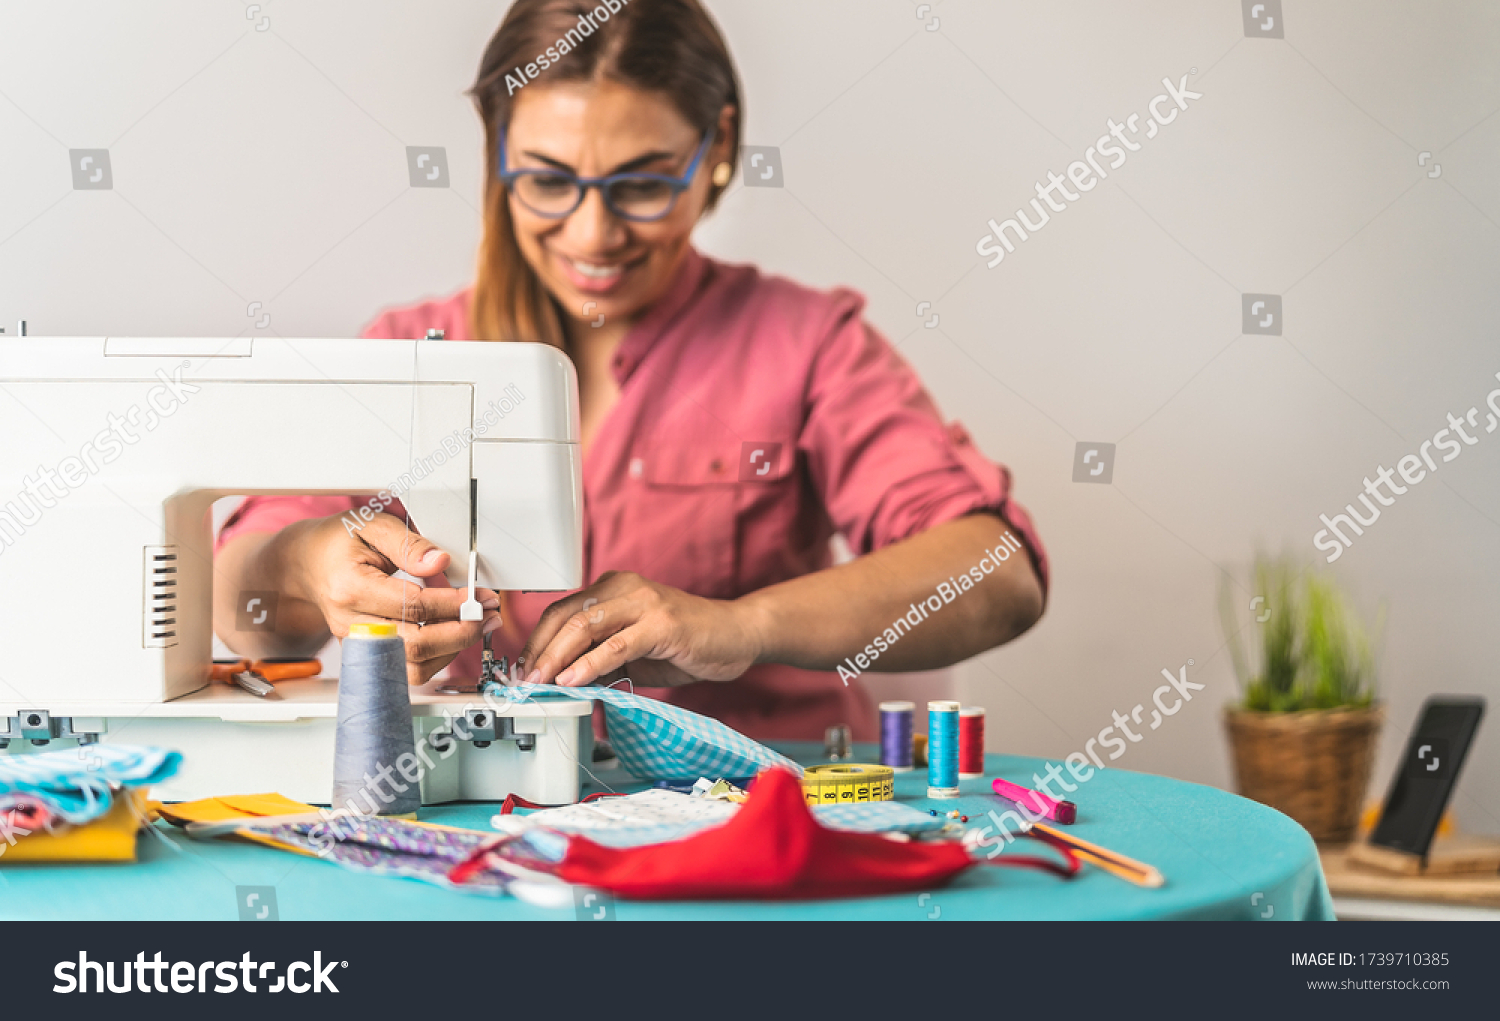 Happy Latin tailor seamstress woman sewing with machine homemade medical face mask for preventing and stop corona virus spreading - textile industry and covid19 healthcare concept  #1739710385